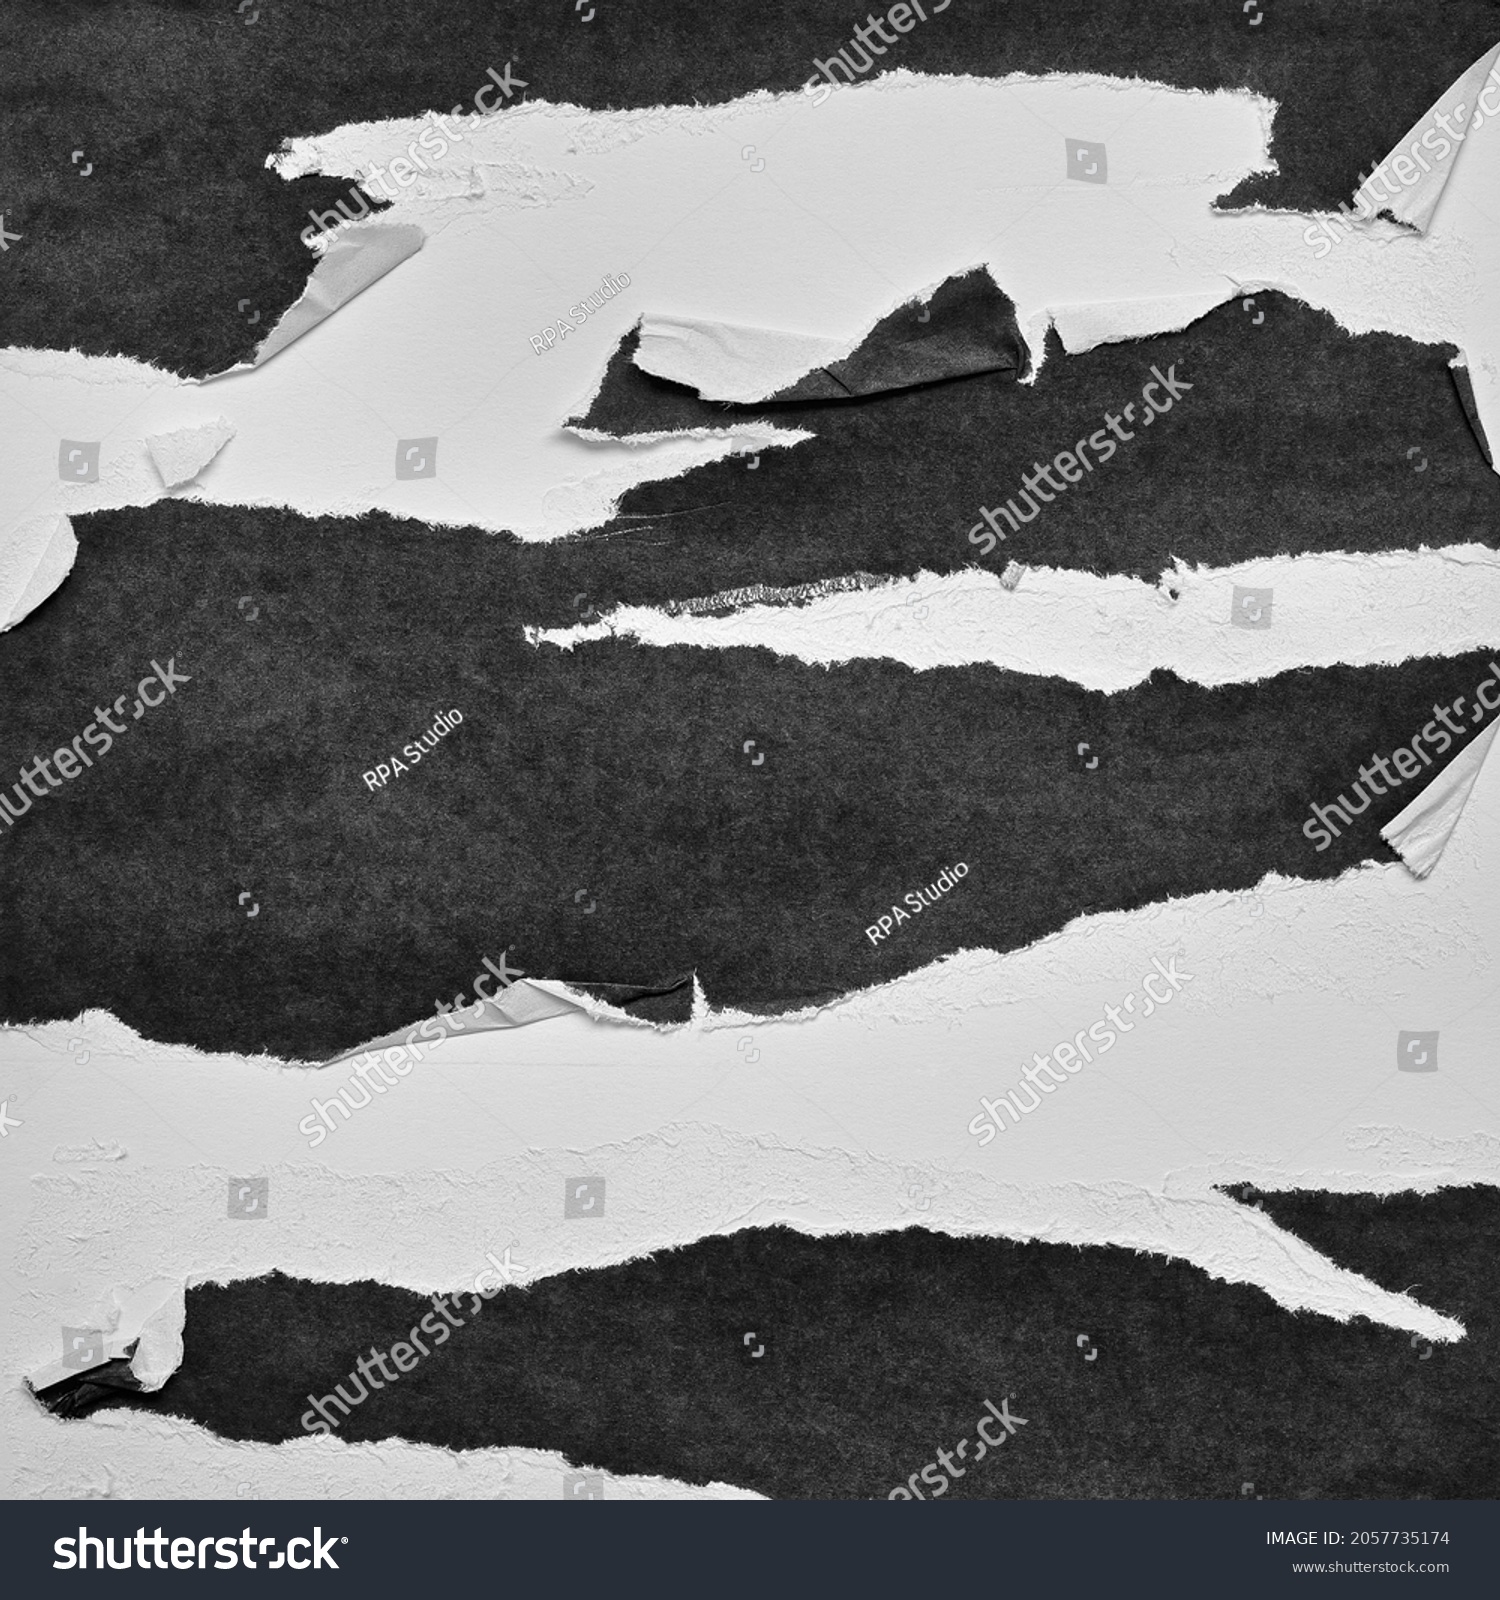 Black and White Torn Paper Collage Style, Ripped Paper Effect, Texture Abstract Background, Copy Space for Text. #2057735174